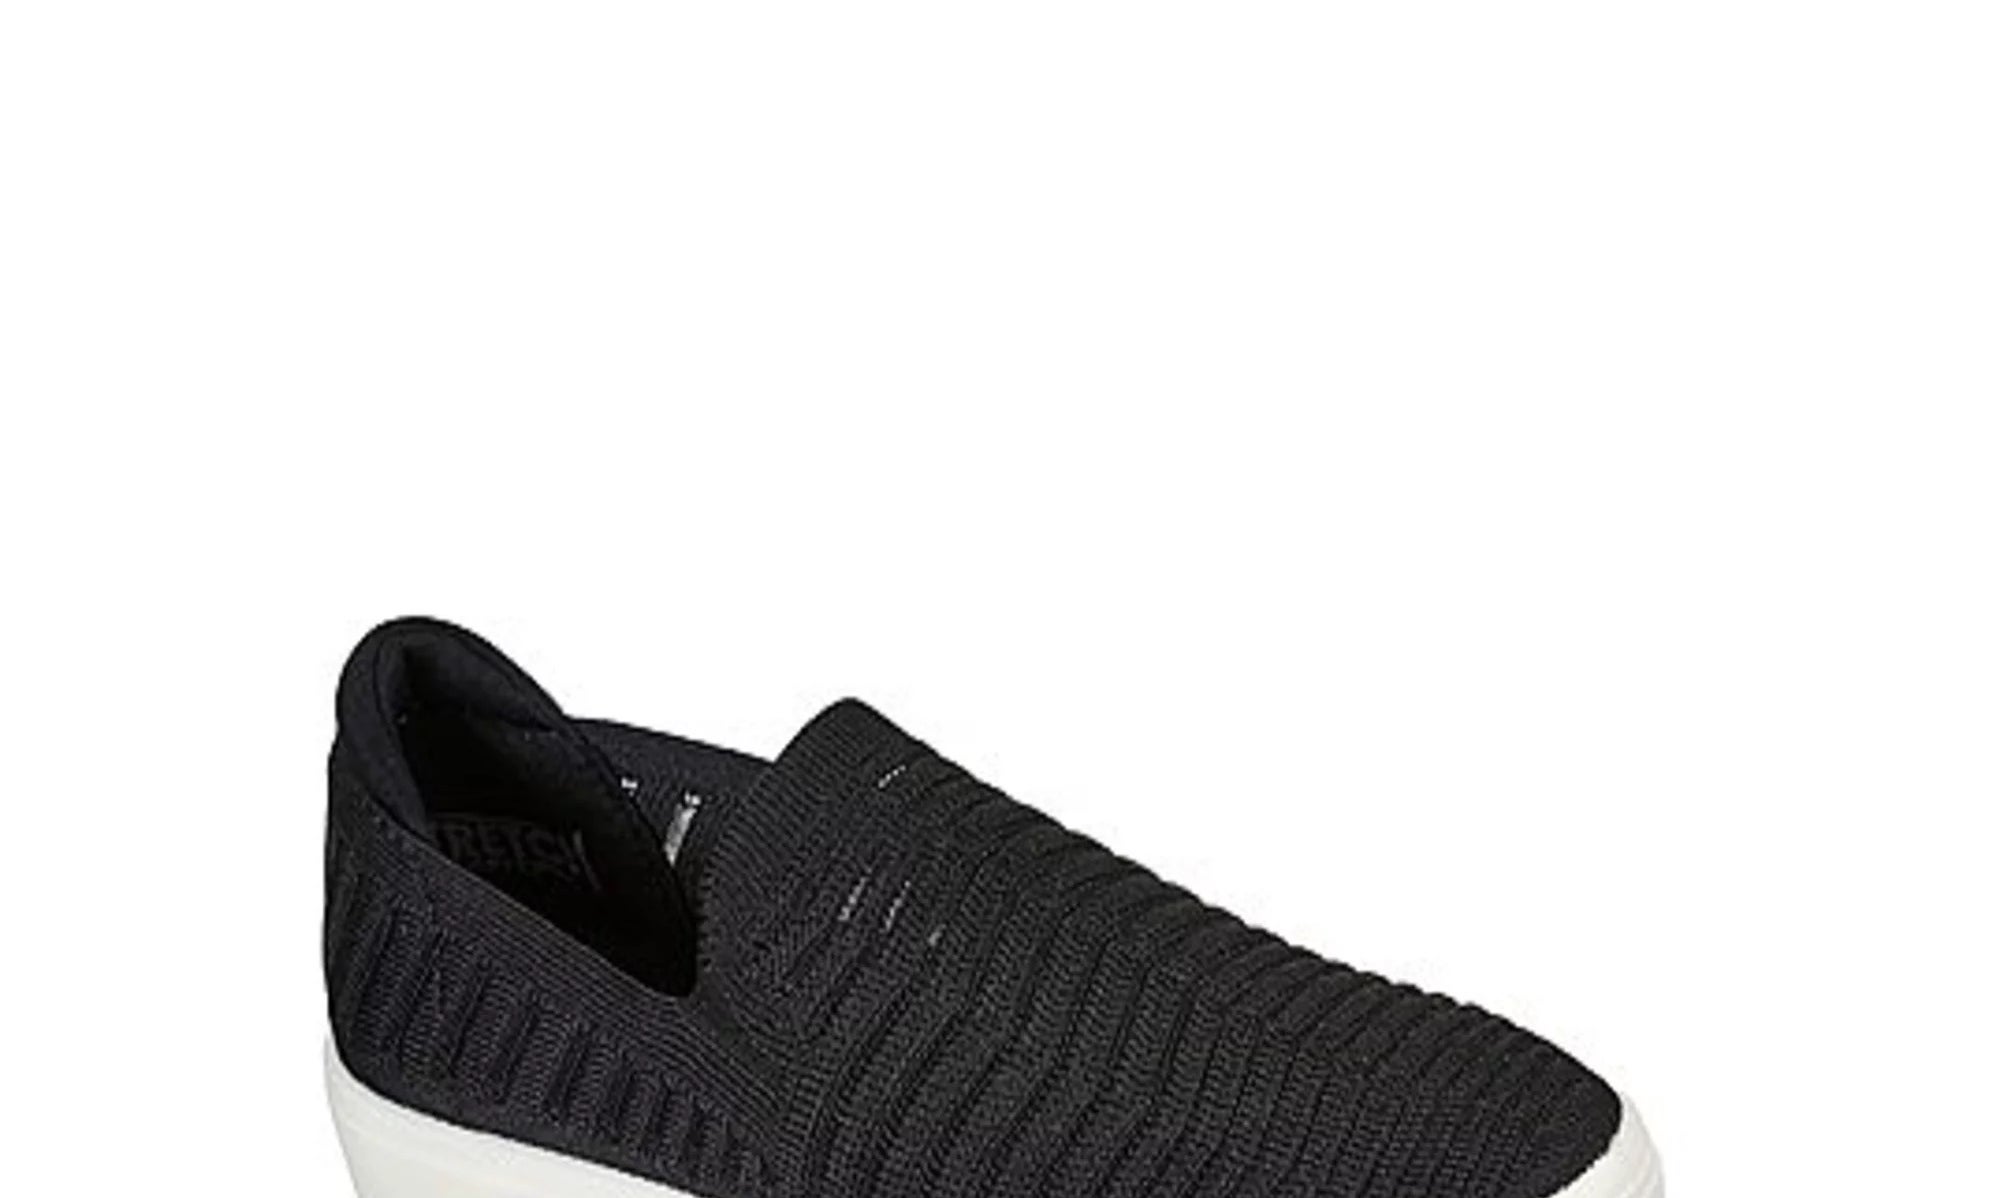 The black slip-on knit sneakers